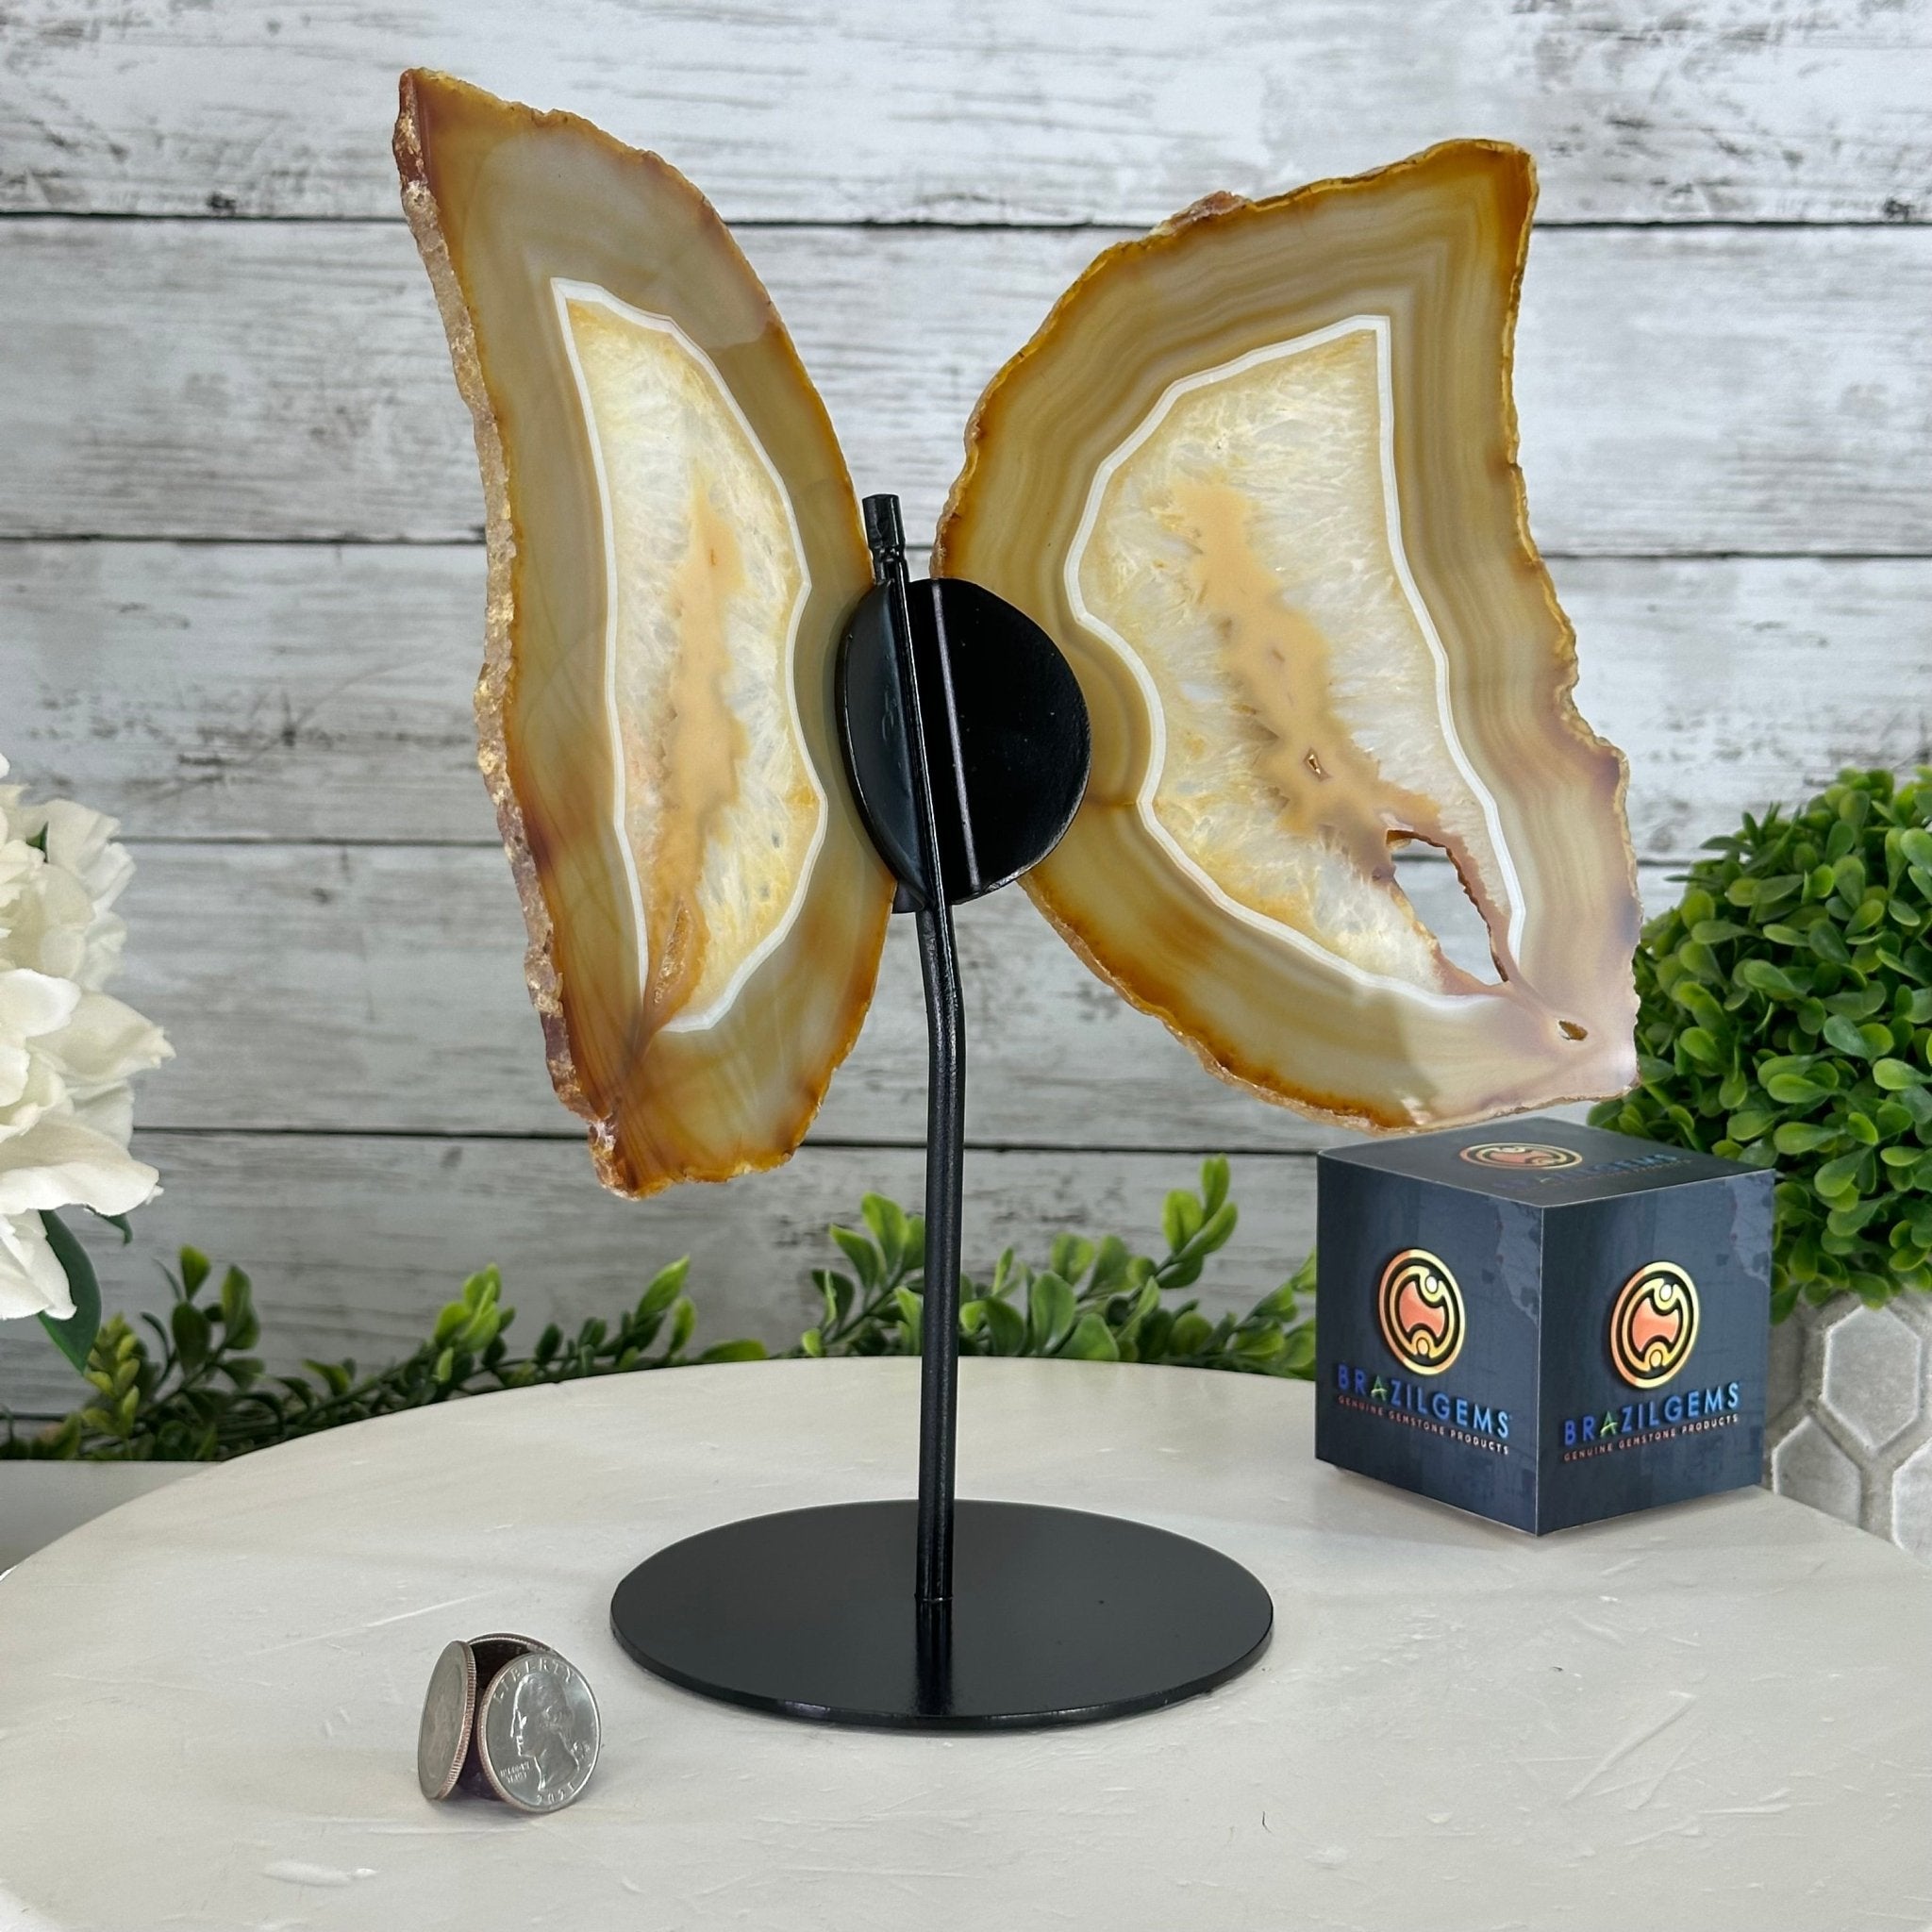 Natural Brazilian Agate "Butterfly Wings", 10.6" Tall #5050NA-122 - Brazil GemsBrazil GemsNatural Brazilian Agate "Butterfly Wings", 10.6" Tall #5050NA-122Agate Butterfly Wings5050NA-122